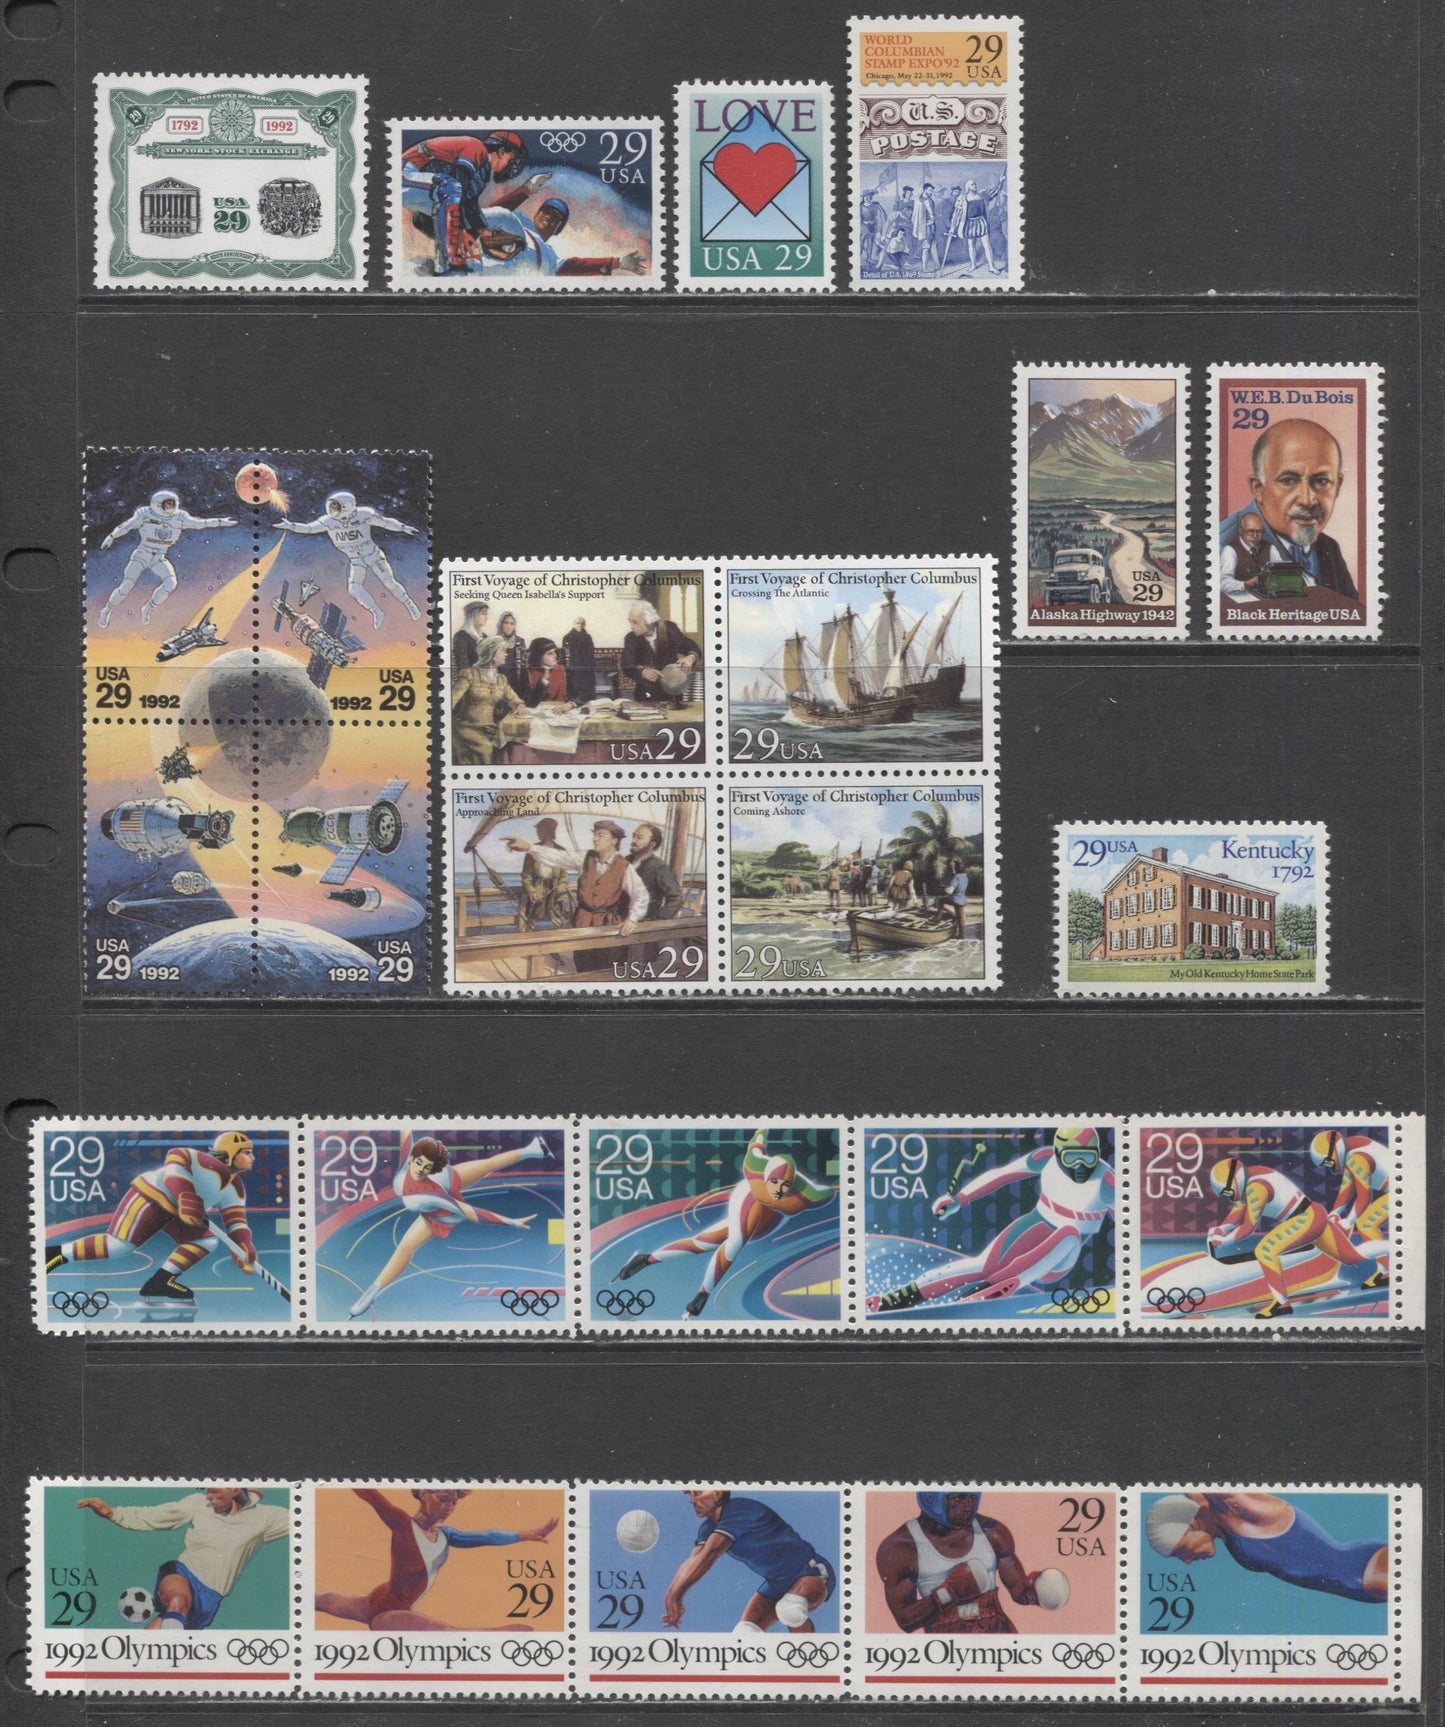 Lot 43 United States SC#2615a/2636 1992 Winter & Summer Olympics-Kentucky Issues, 12 VFNH Singles, Block Of 4 & Strips Of 5, 2017 Scott Cat. $15.2